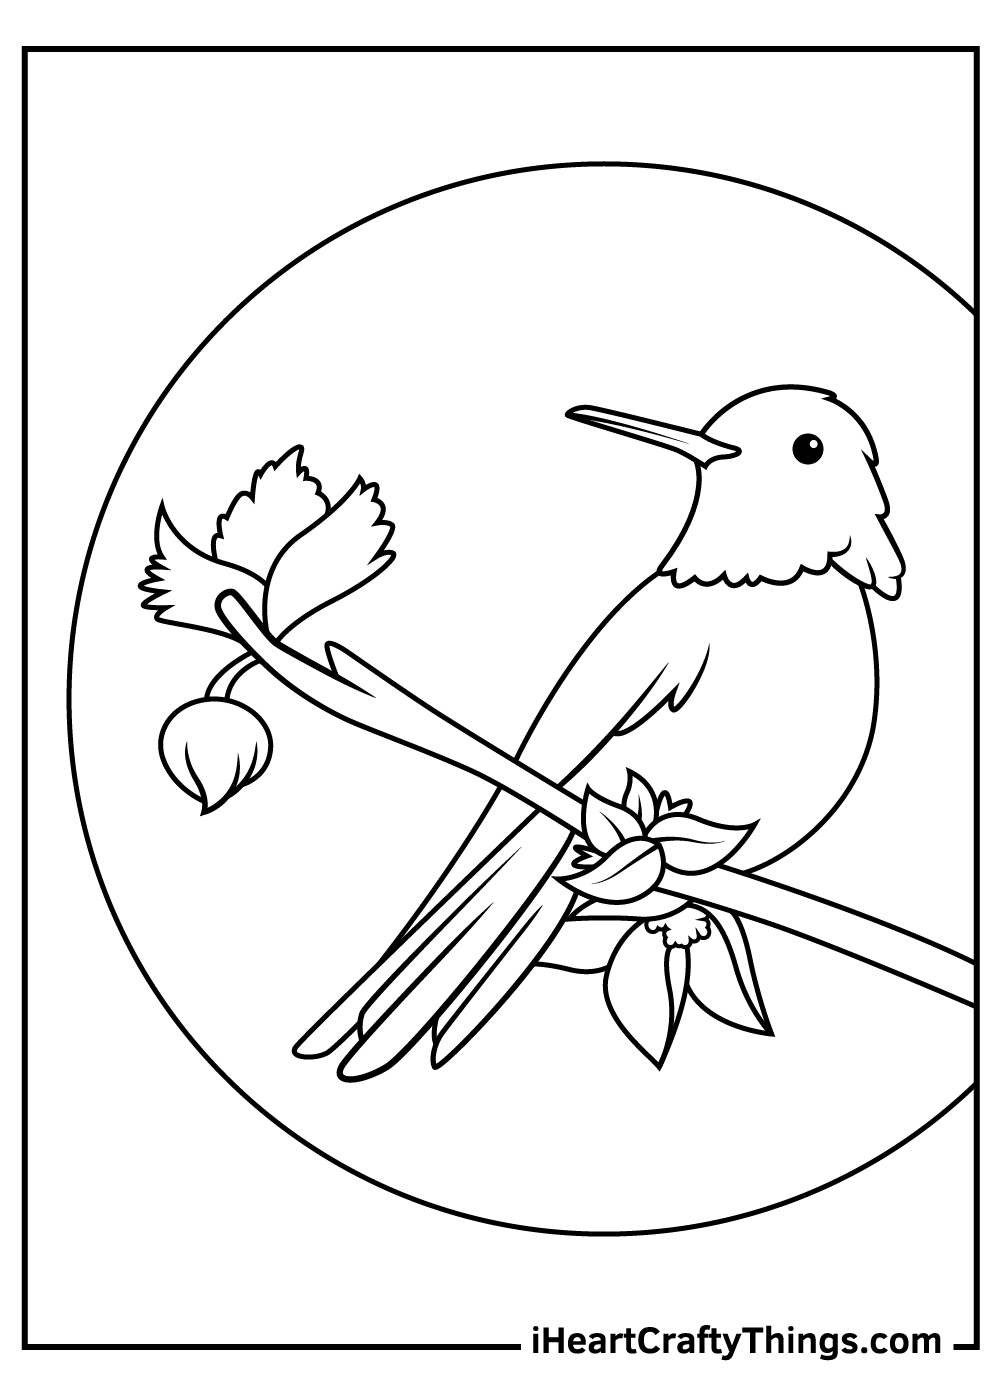 Printable Hummingbird Coloring Page Instant Download Hand Drawn Coloring Pages Black and White Hummingbird Coloring Art for Kids Adults